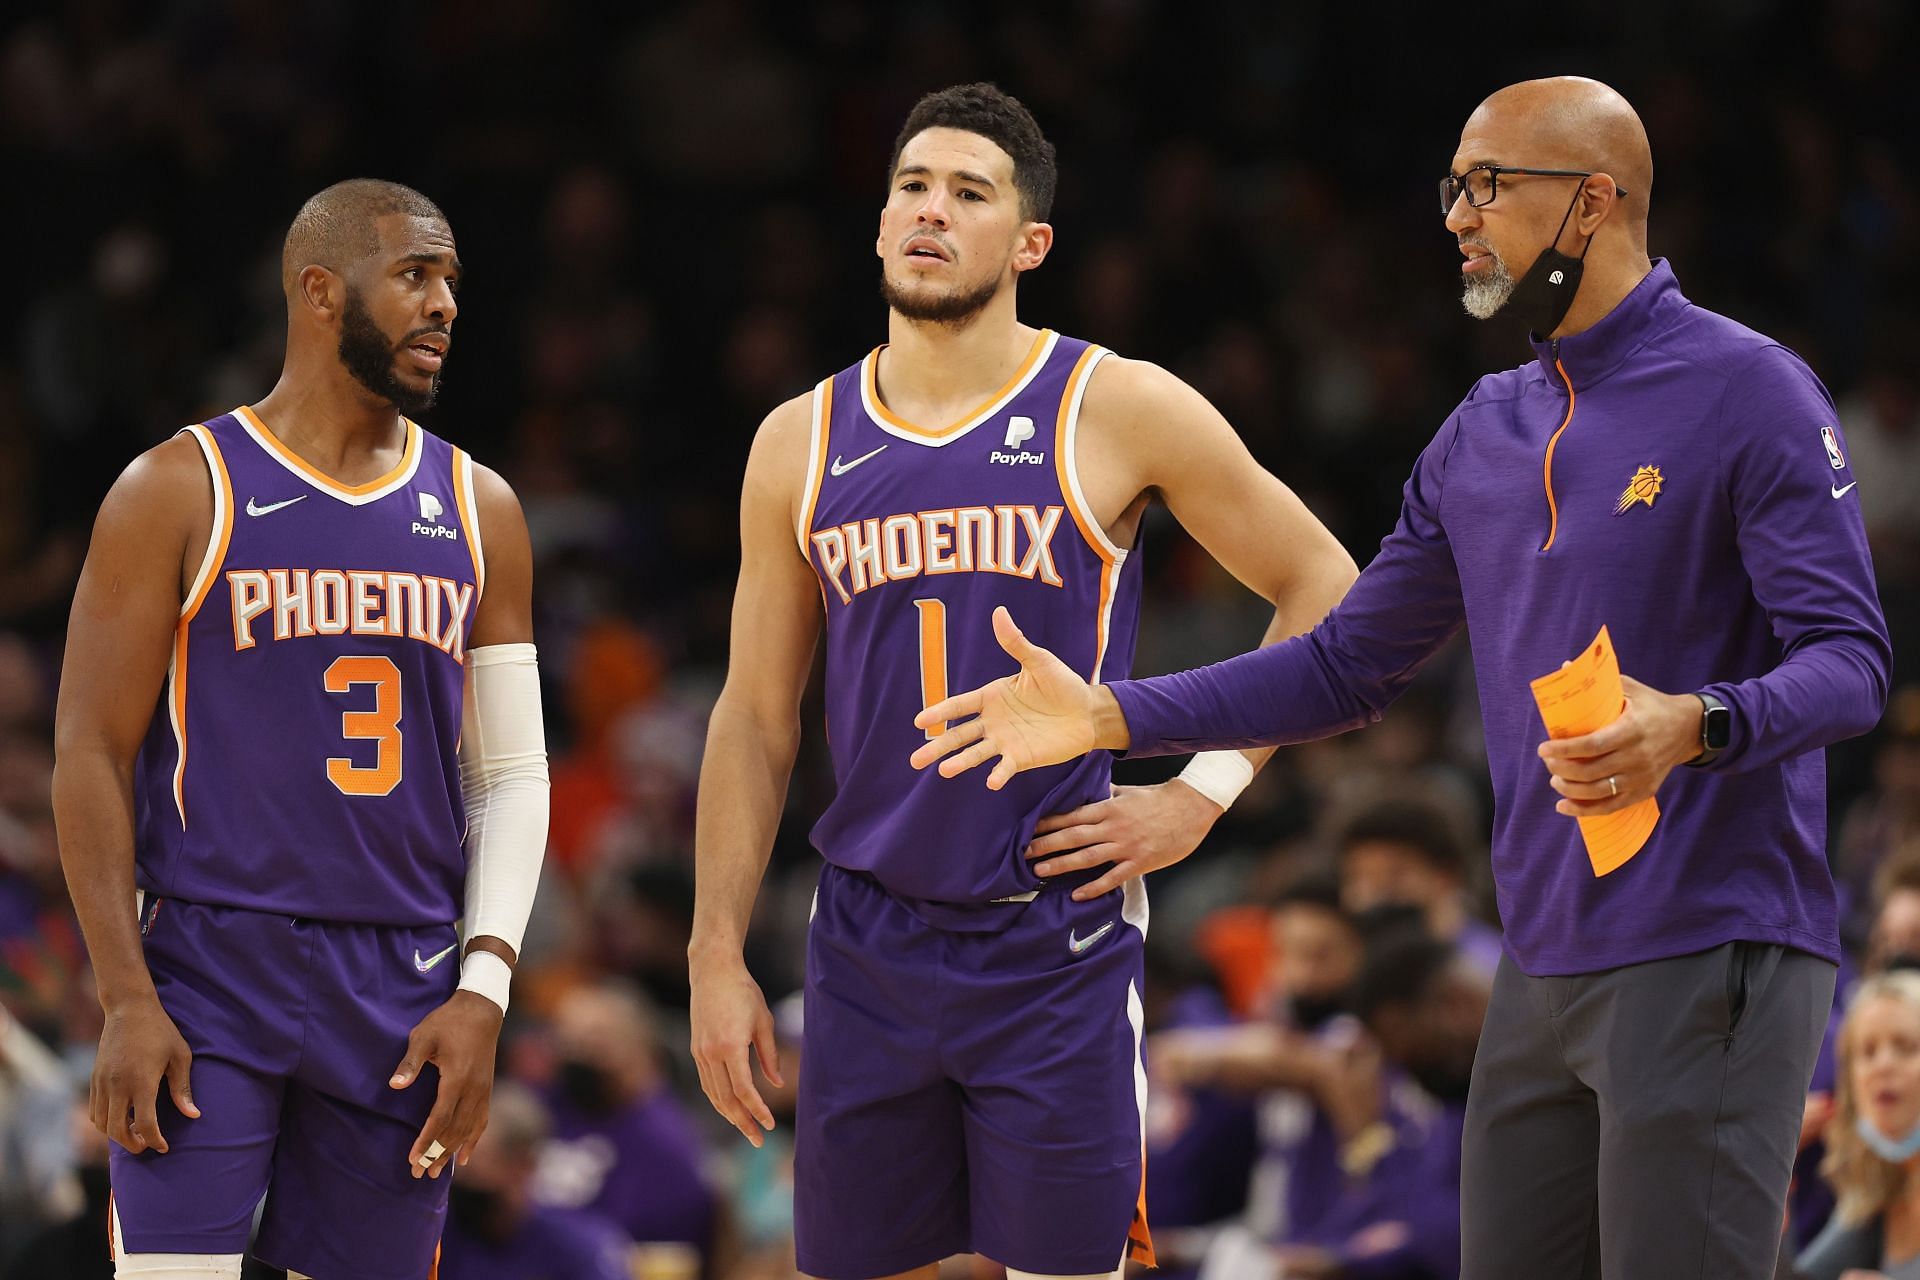 Phoenix Suns: It's time to prove yourself, Devin Booker